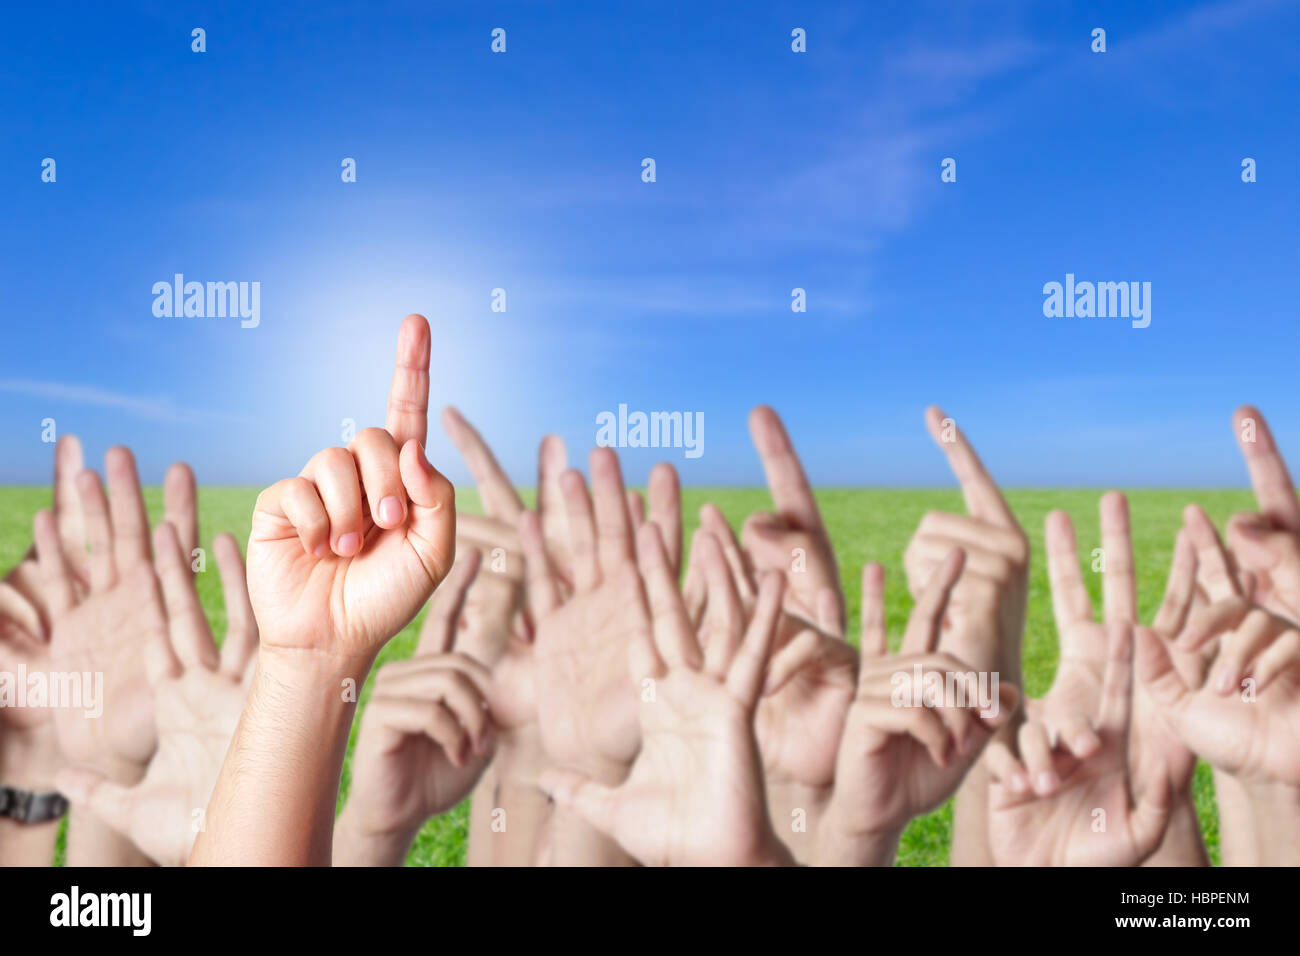 Hands Raised Together Stock Photo